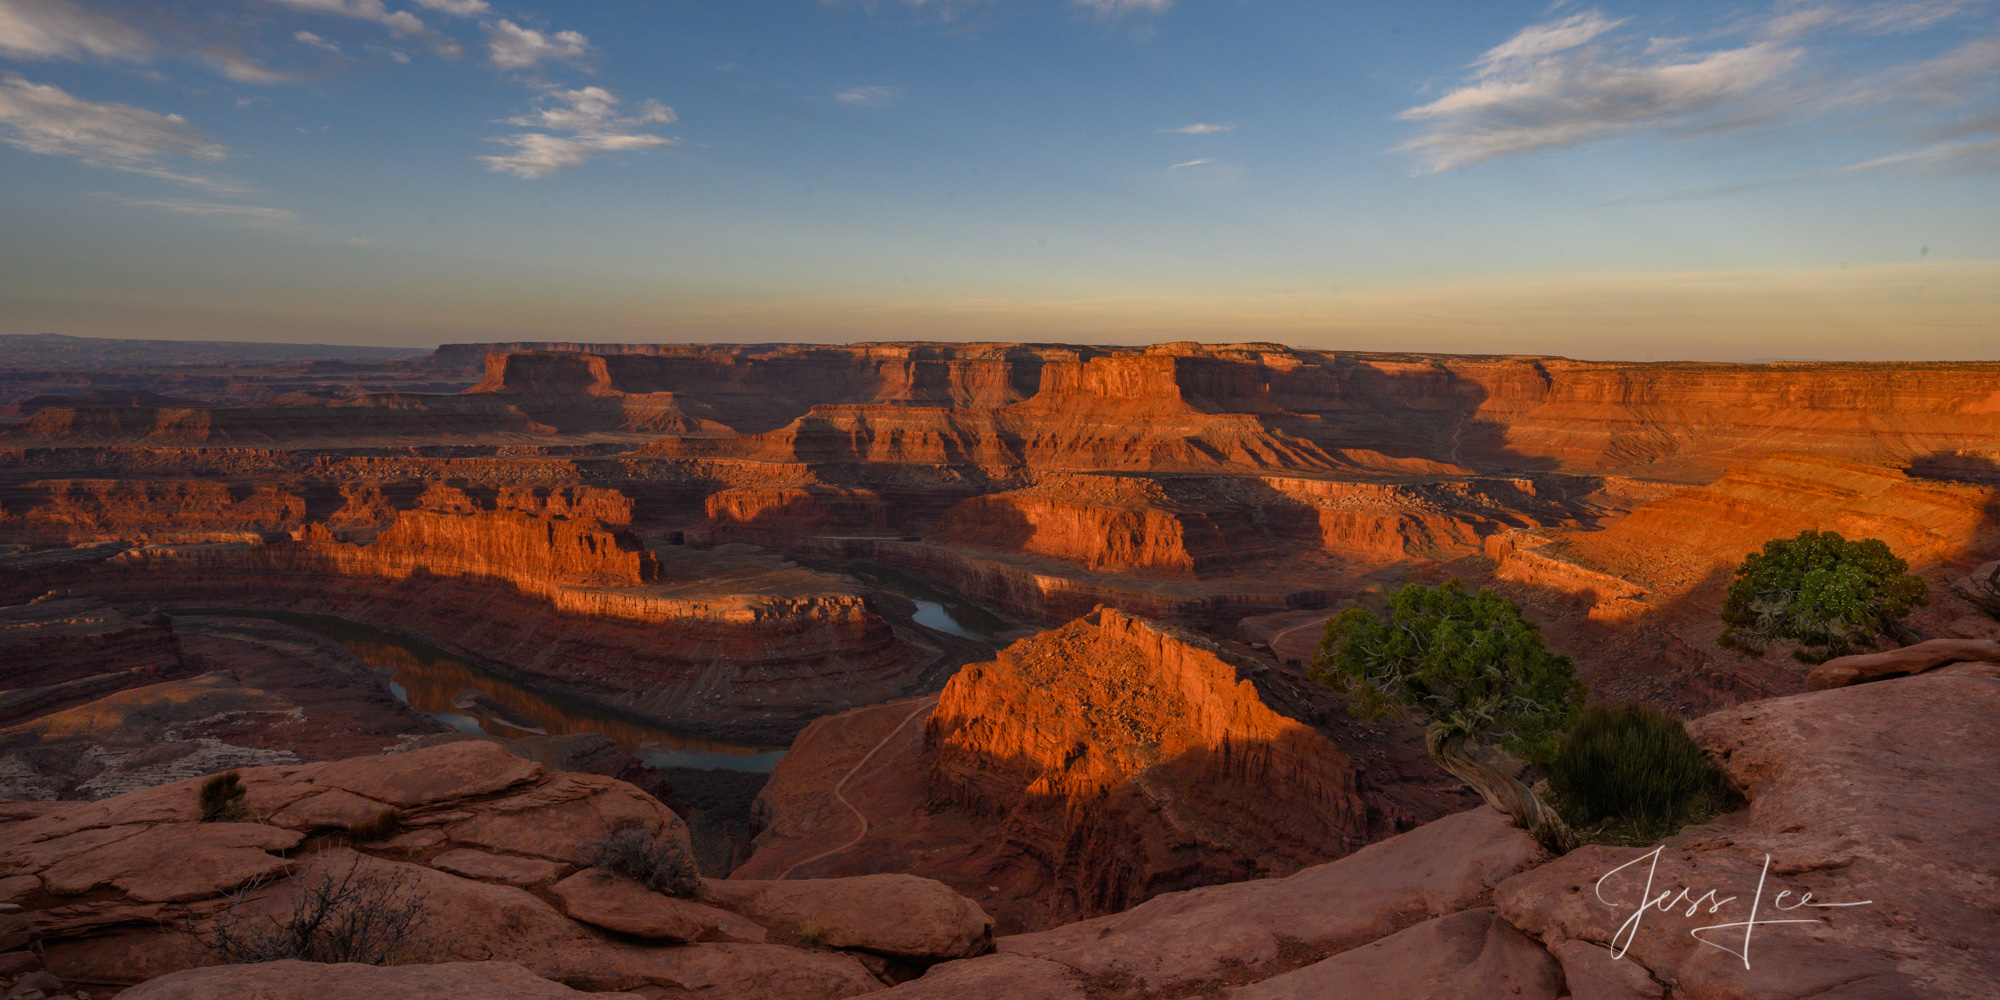 Colorado River Overlook from Dead Horse Point